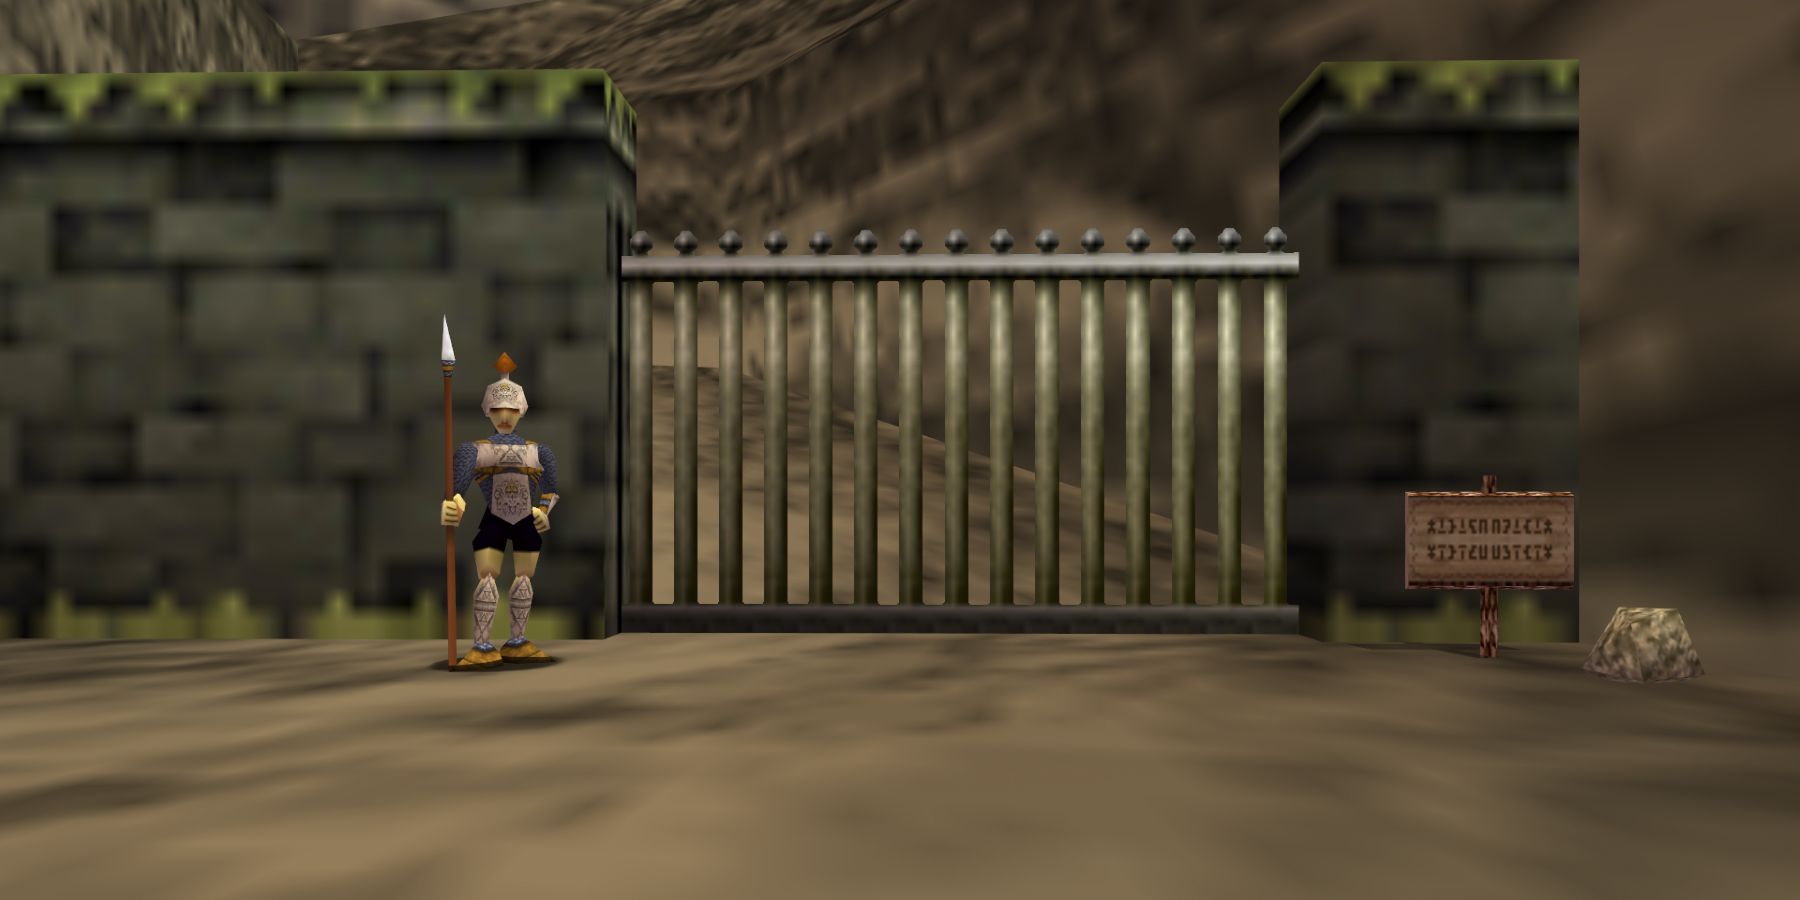 The Goron's home is only accessible by a single gate, which requires express permission from the royal family to enter